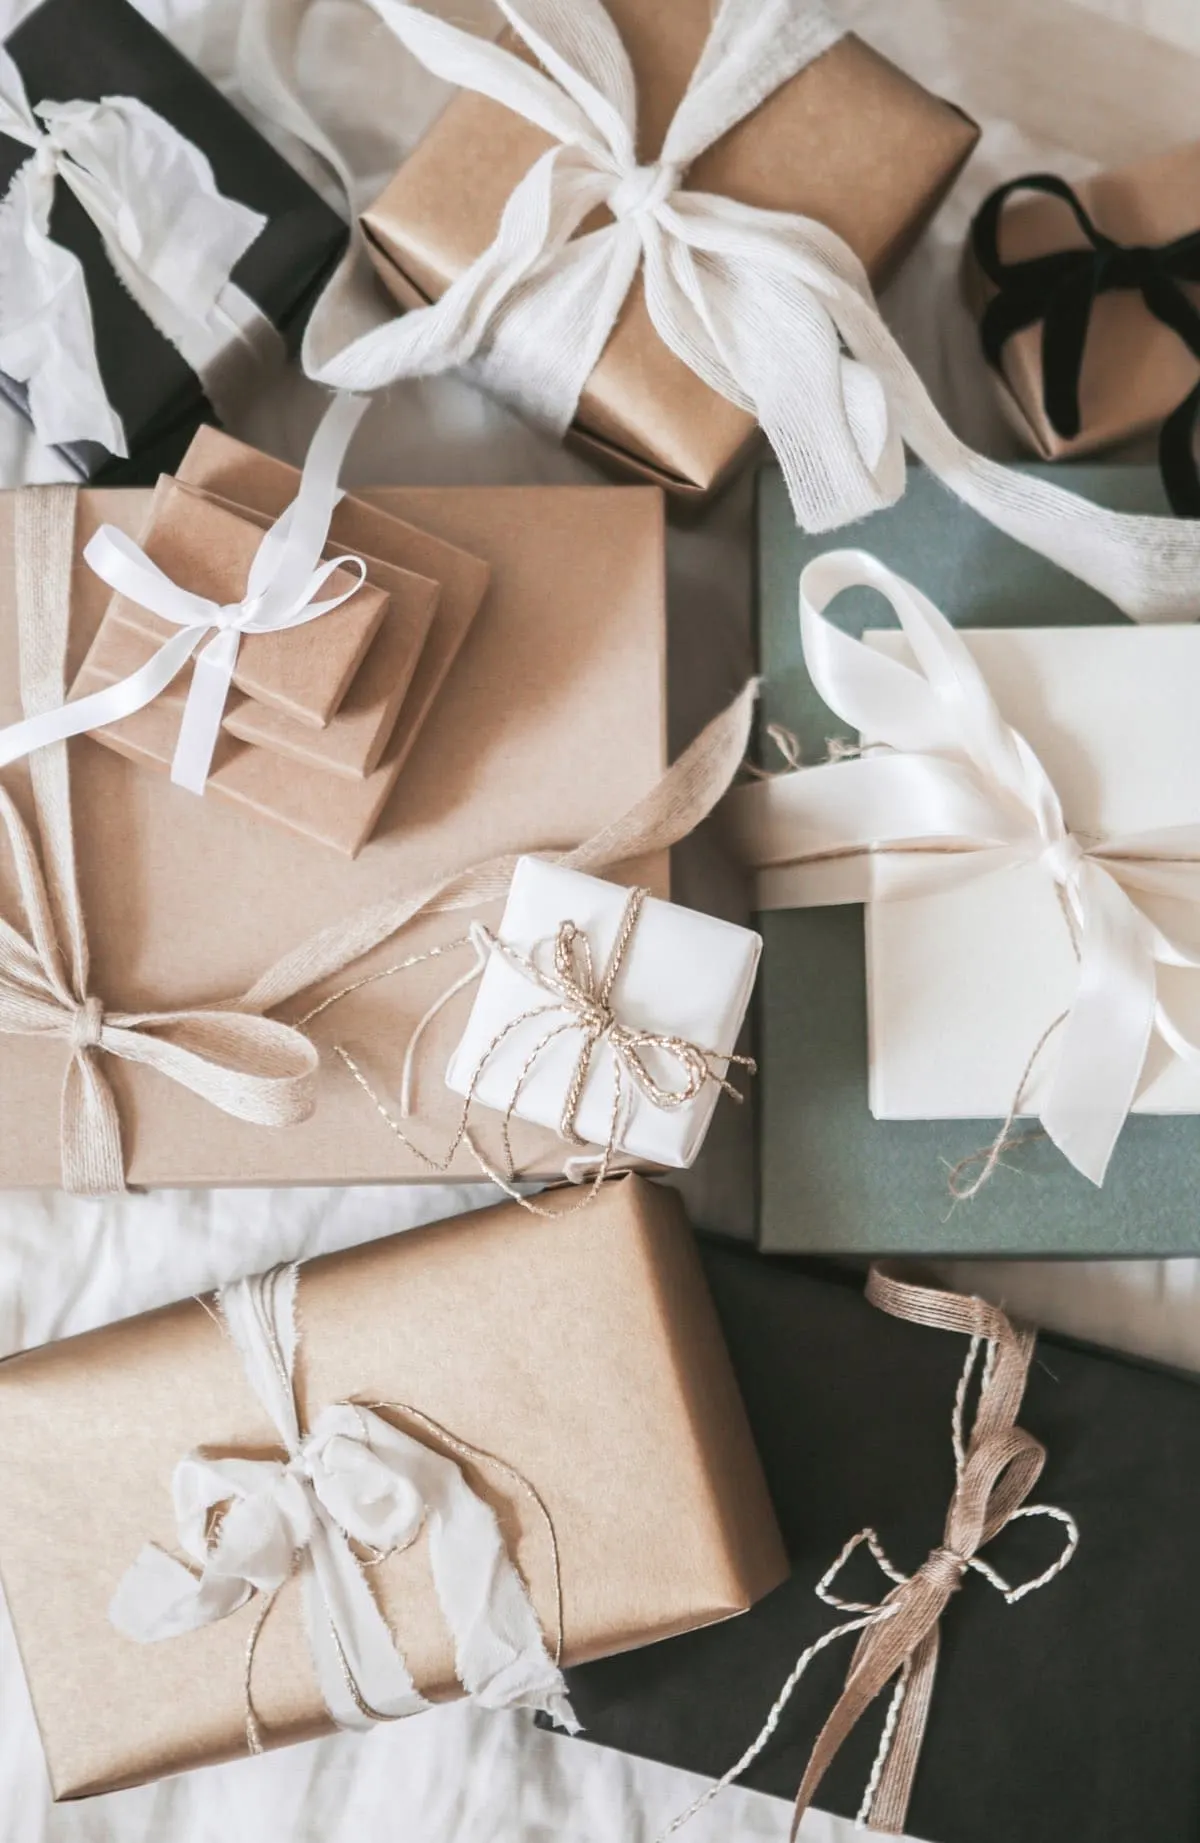 Receiving gifts is one of the five love languages. But despite what you may think, there's a lot more to this love language than simply receiving physical things or expensive things. Here are 55 examples of the receiving gifts love language so you can better understand your partner.